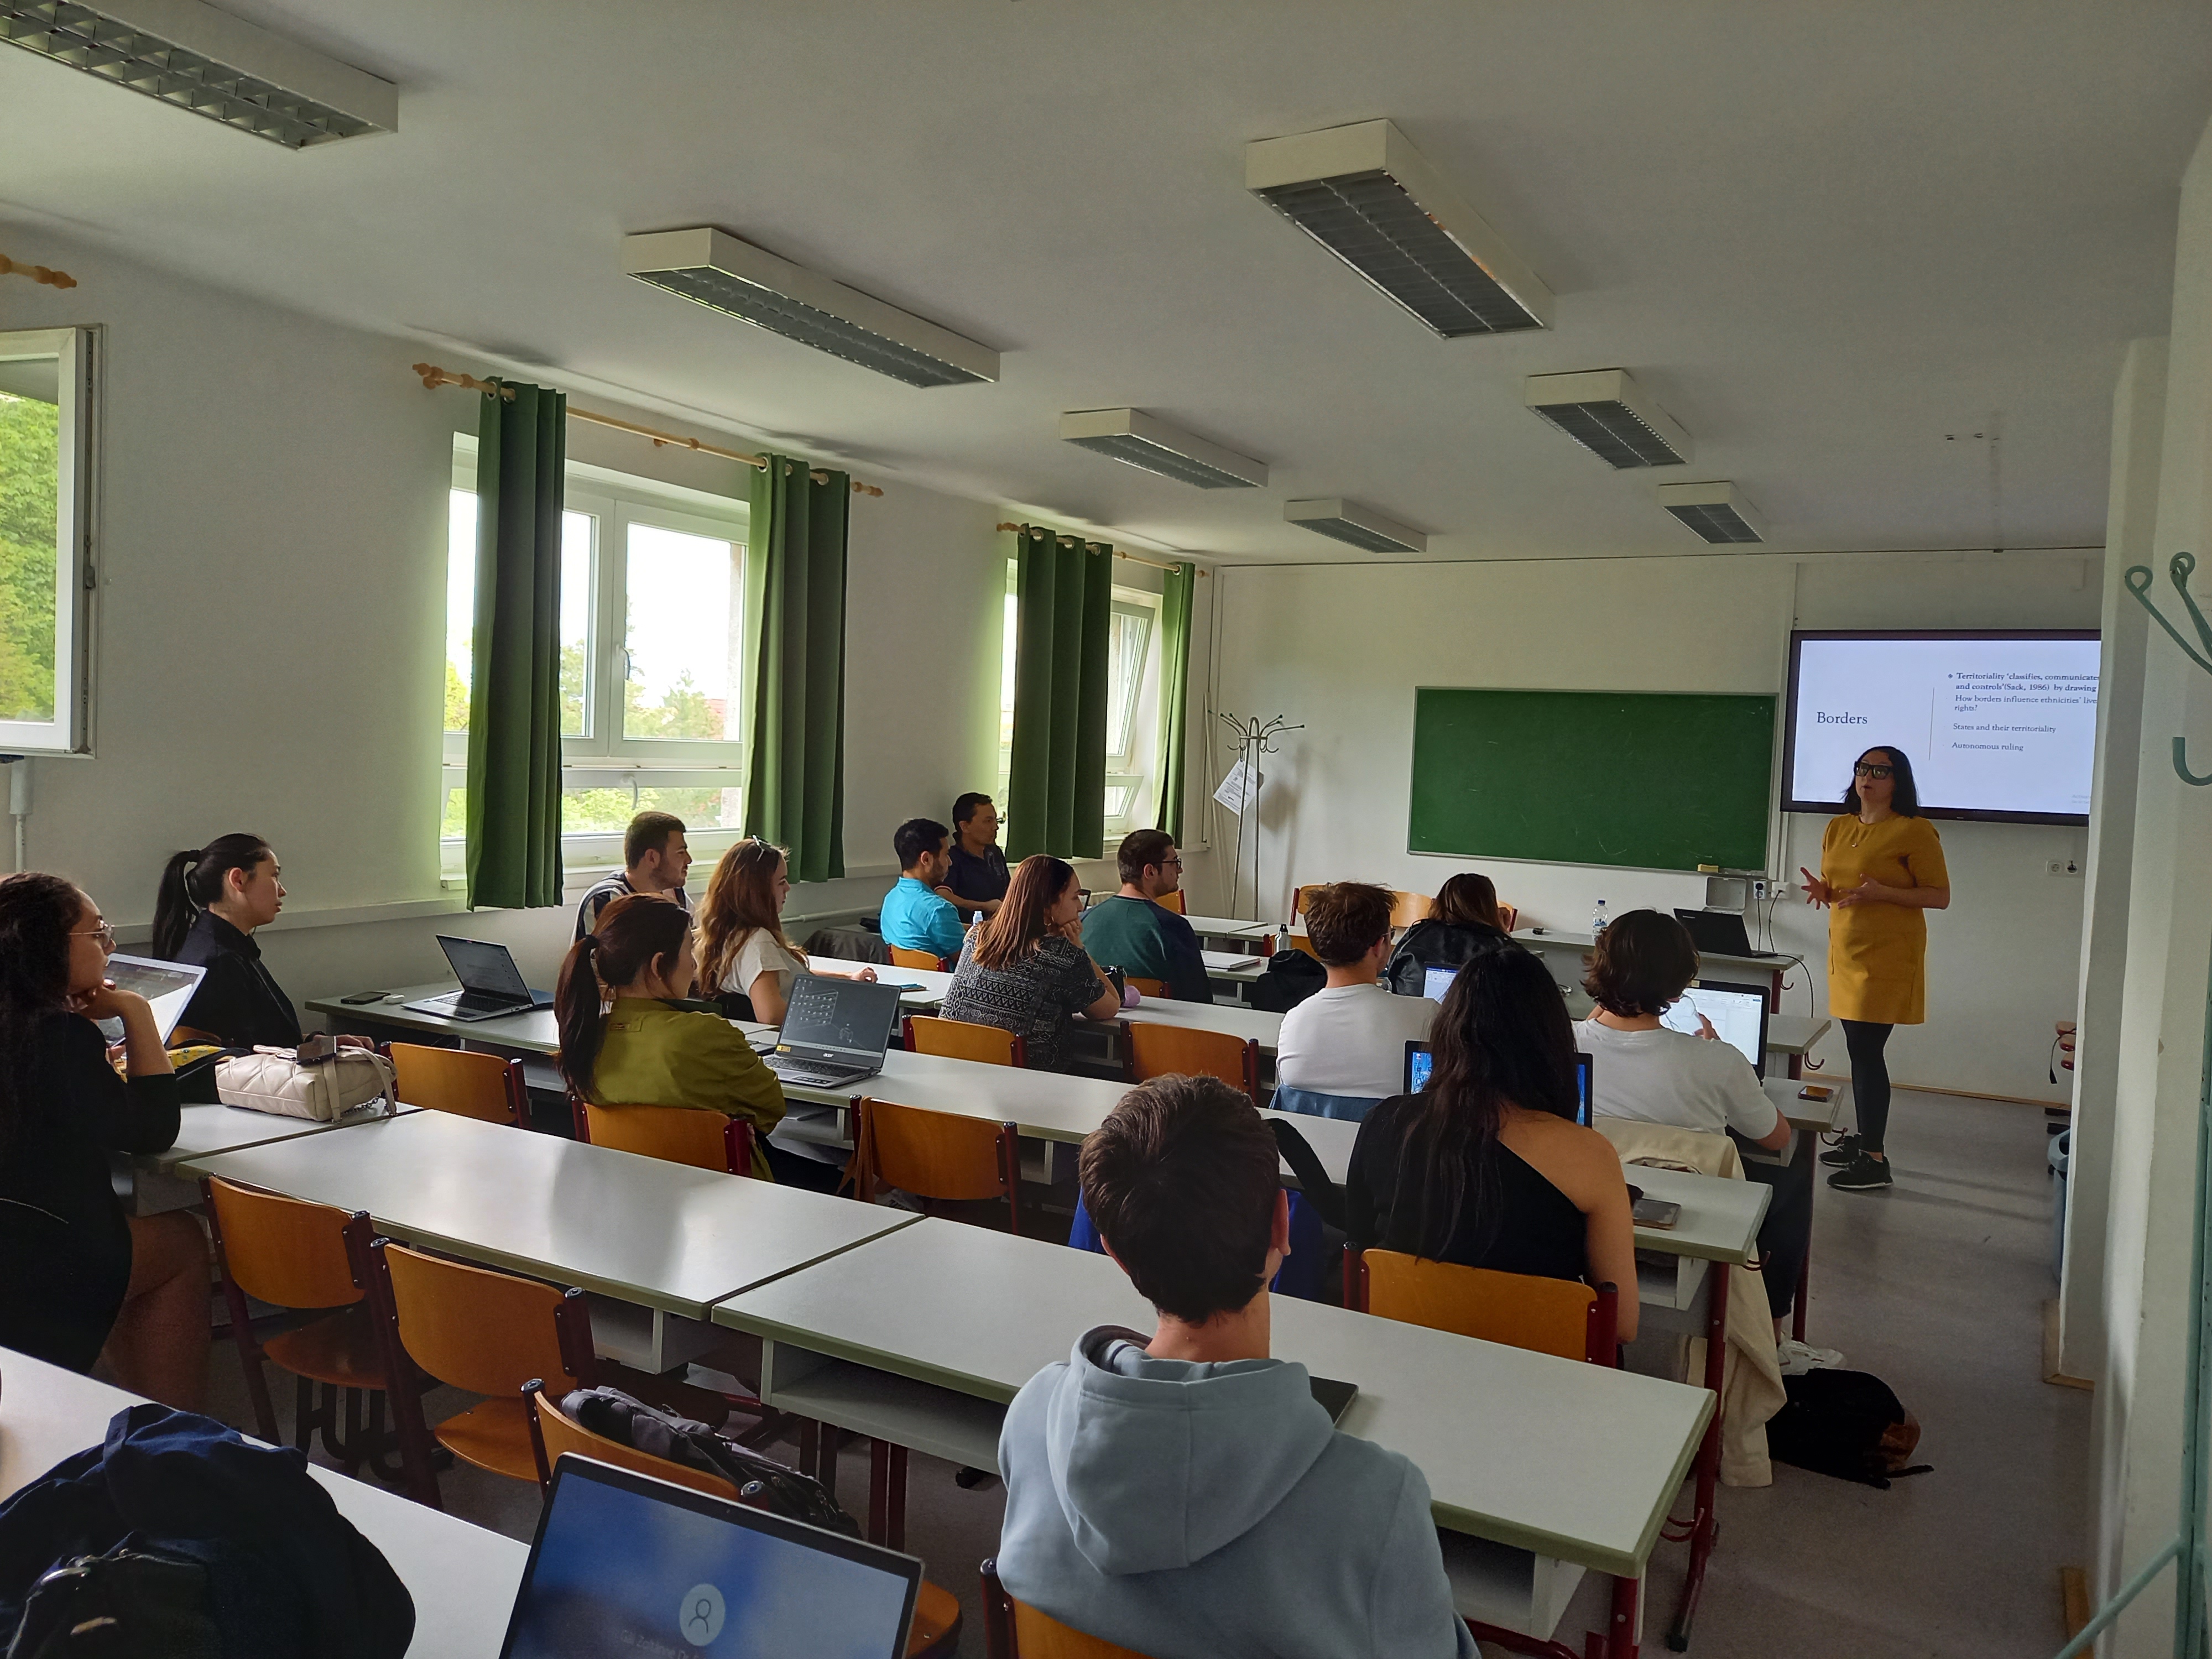 Students’ and Academic CEEPUS mobility at the University of Pecs (Hungary)